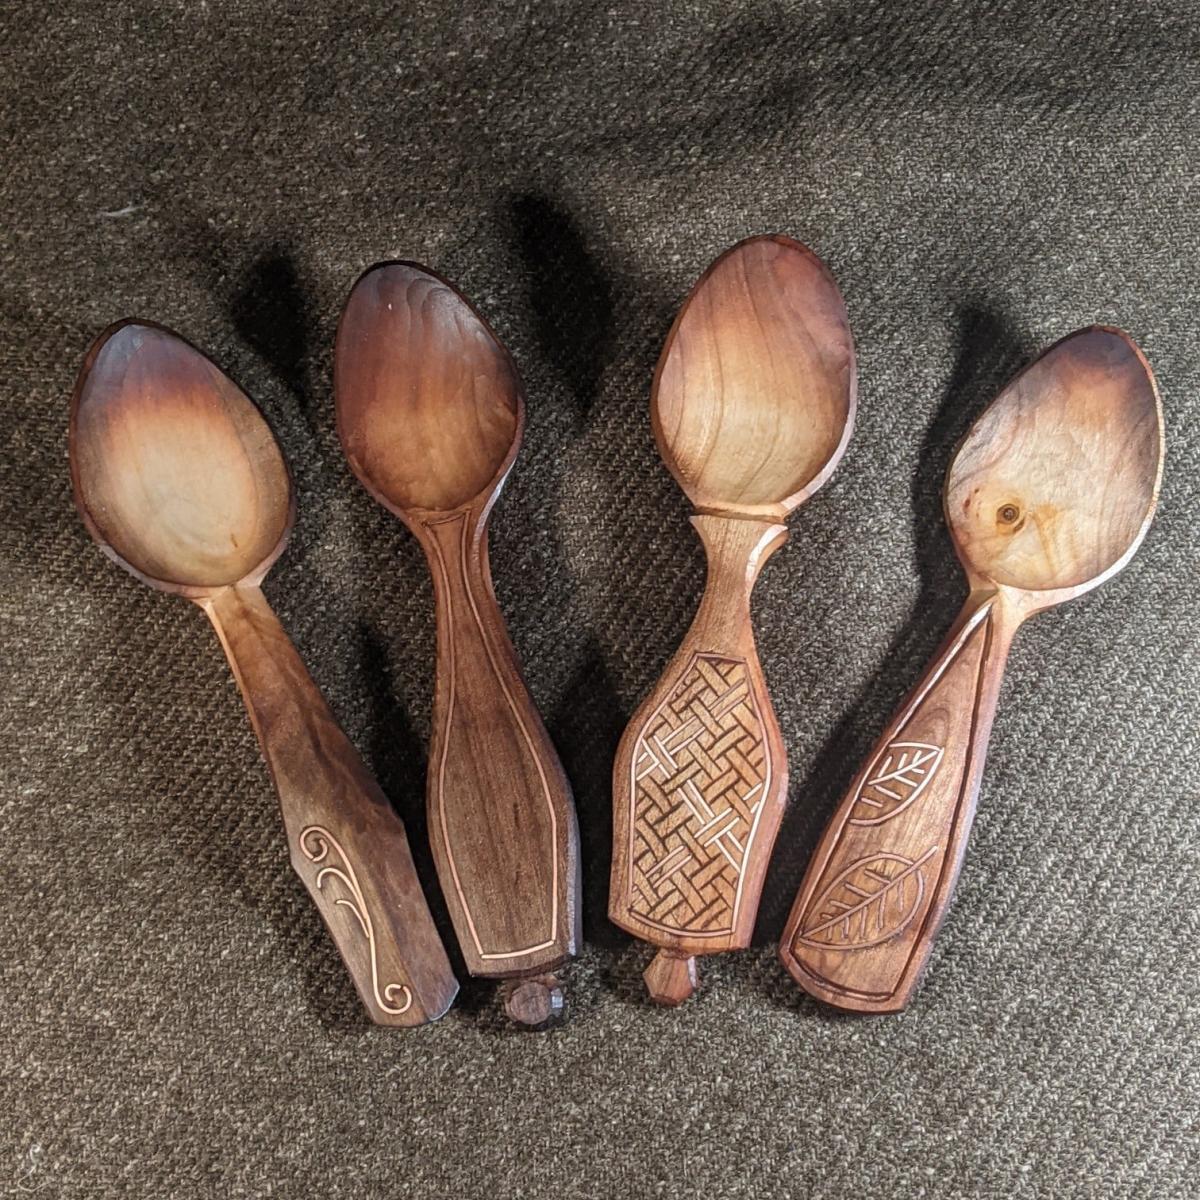 Chiron’s first 4 inlayed spoons. 